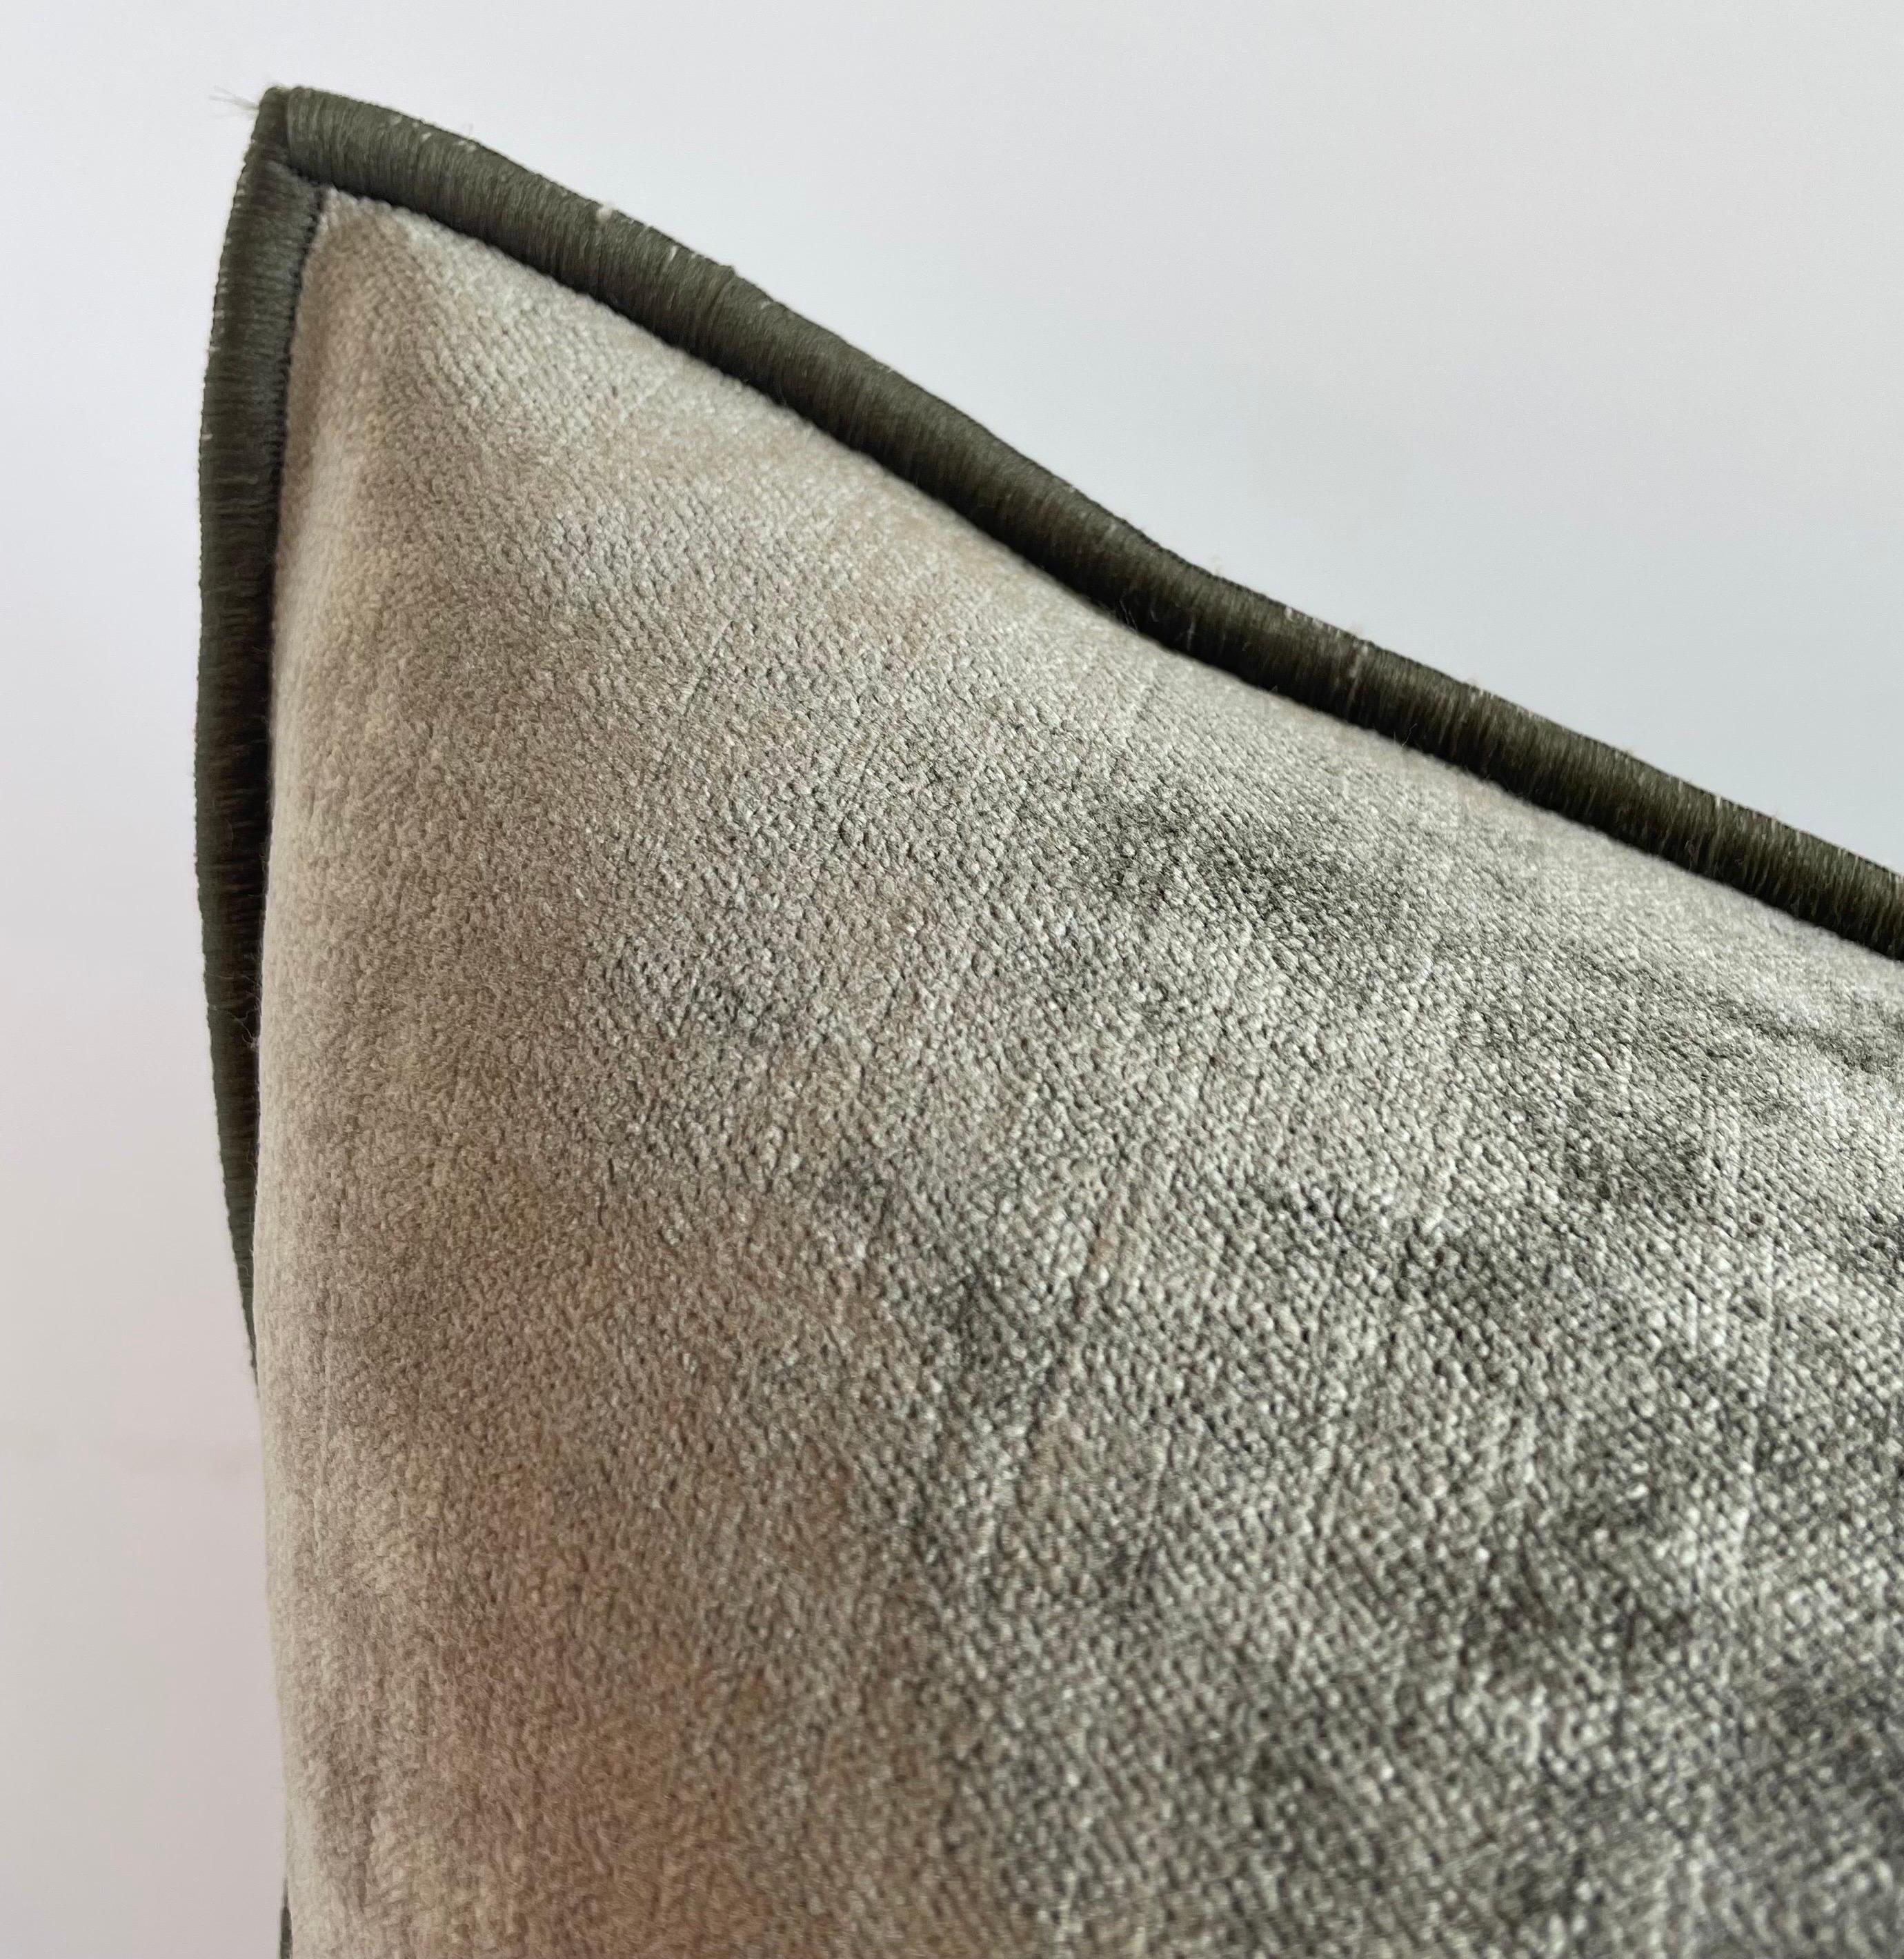 Royal velvet pillow by Maison de Vacance. 
Vintage style velvet lumbar with binded edge. 
Metal zipper closure, and leather pull. If this item is backordered, please allow 4-6 weeks for production.
Size: 12” x 20” 
Color: Kaki
A gray green